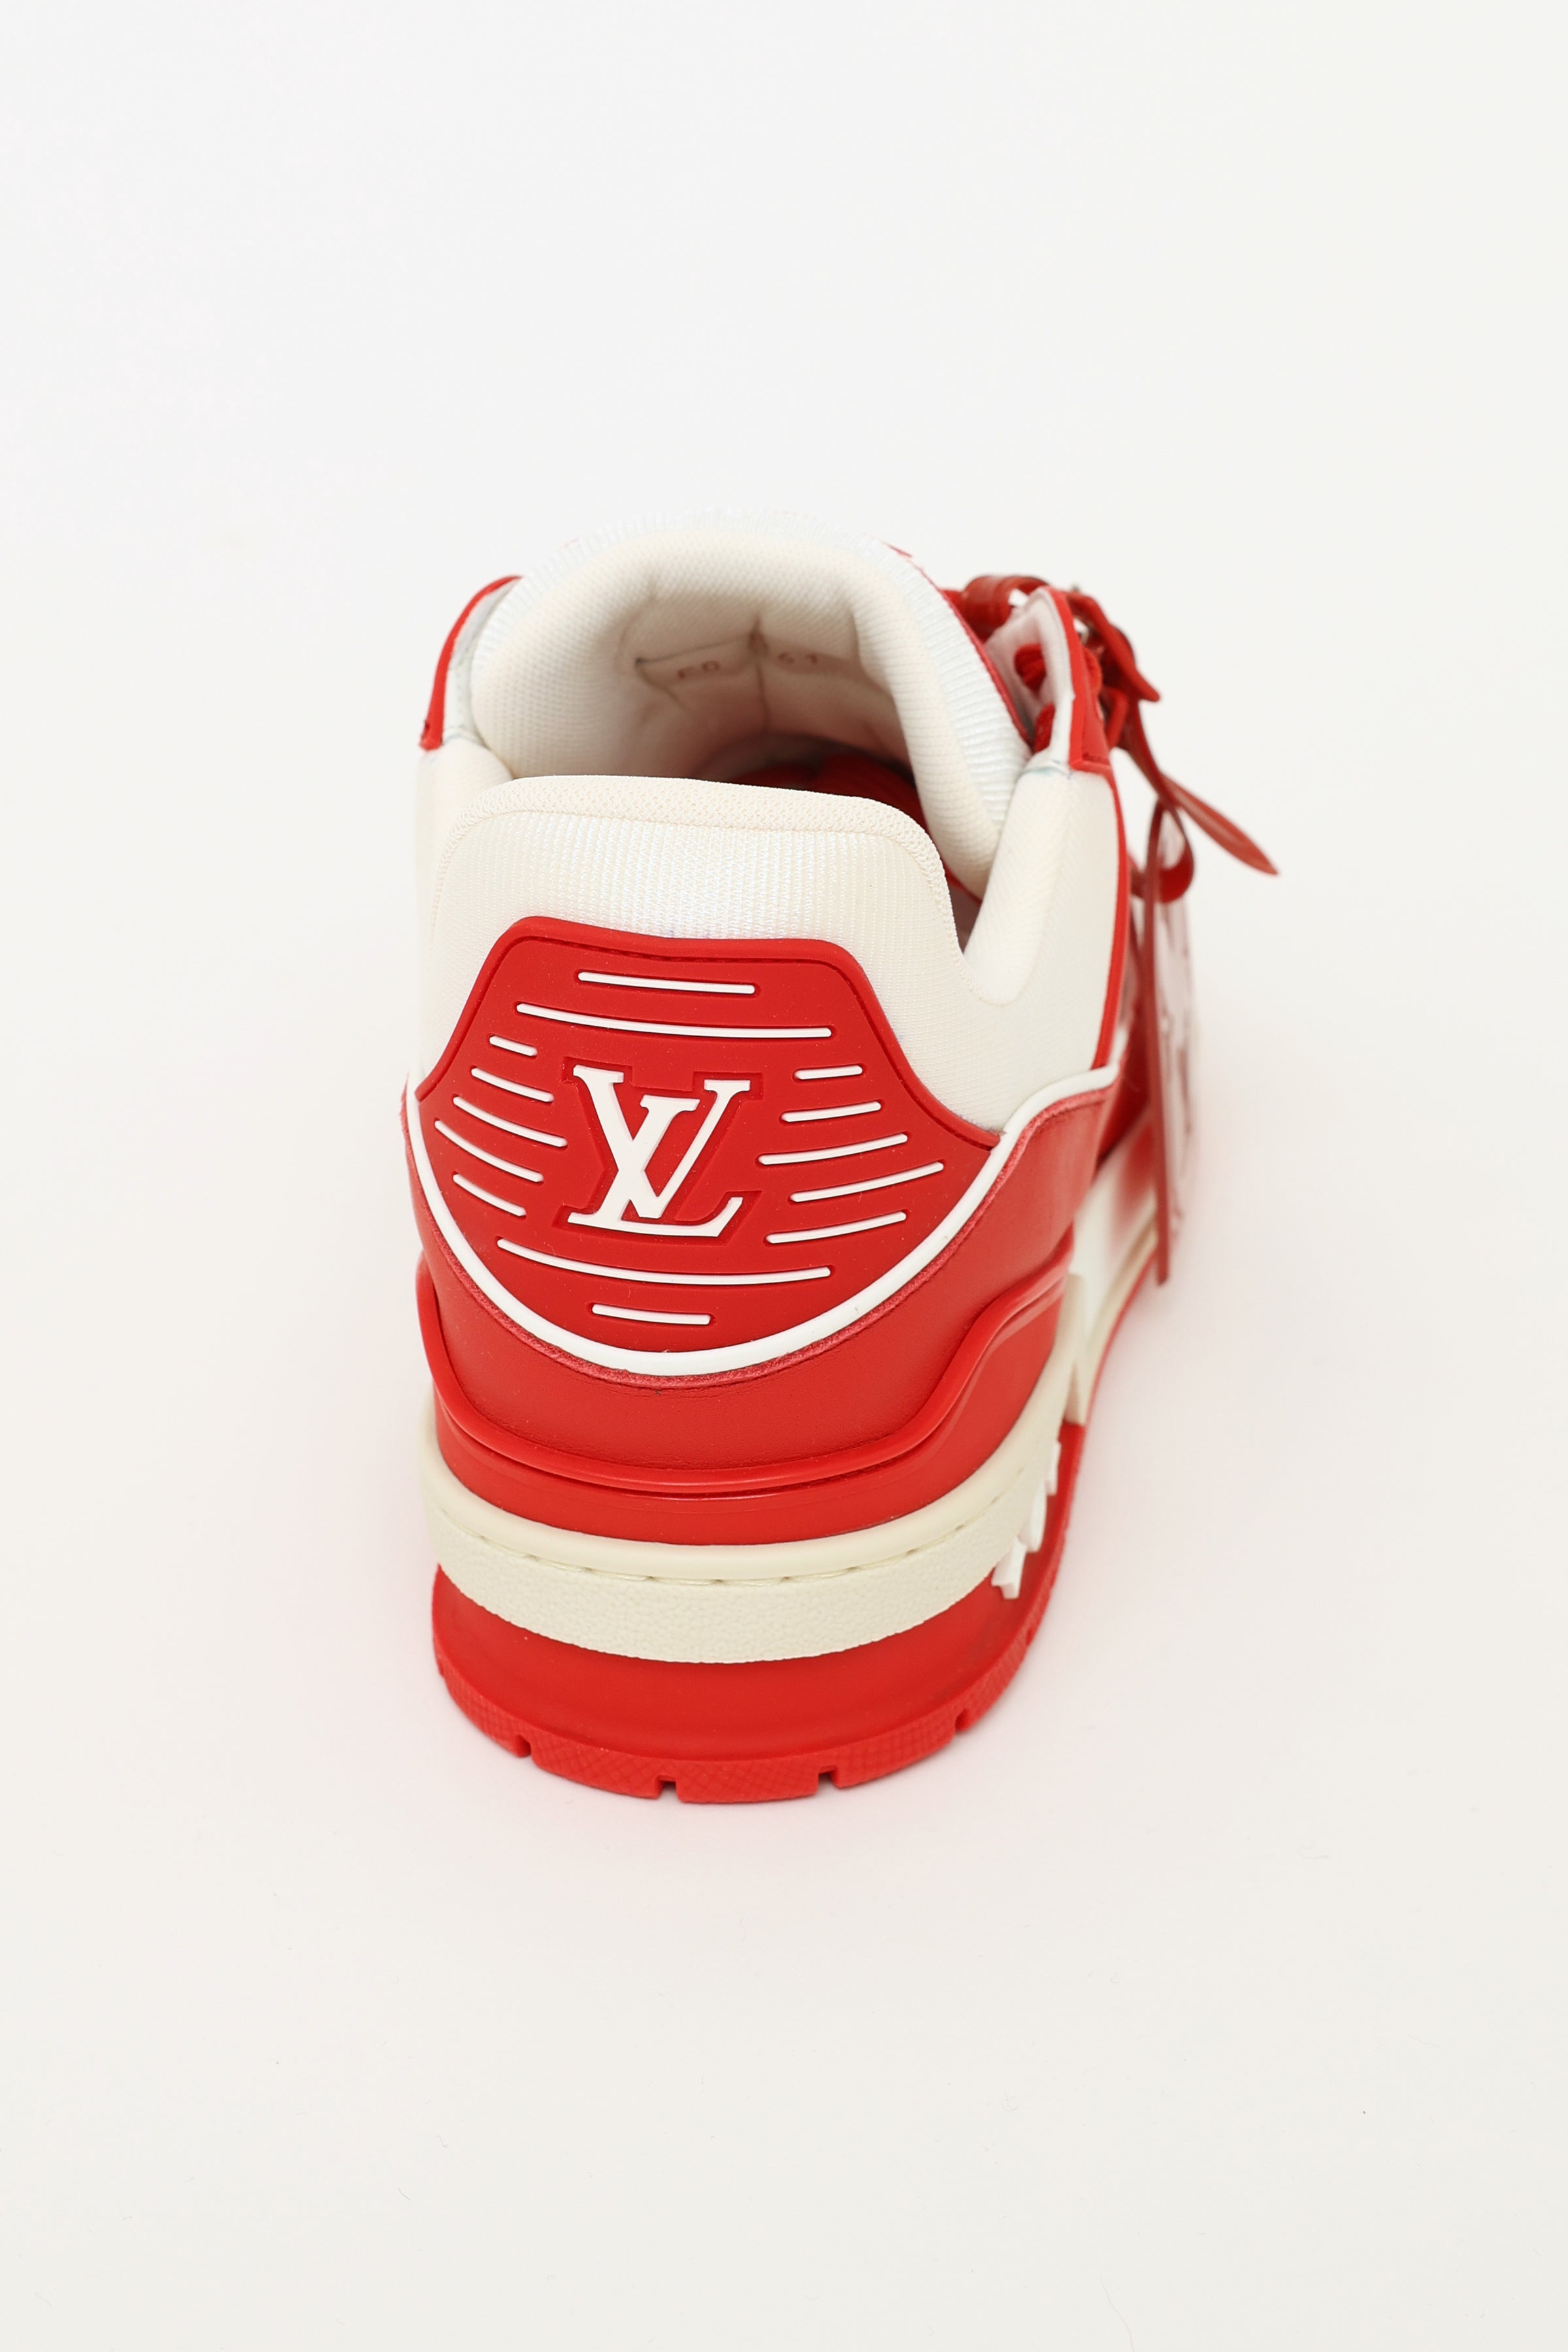 Louis Vuitton x Nike - Authenticated Trainer - Leather Red For Man, Never Worn, With Tag